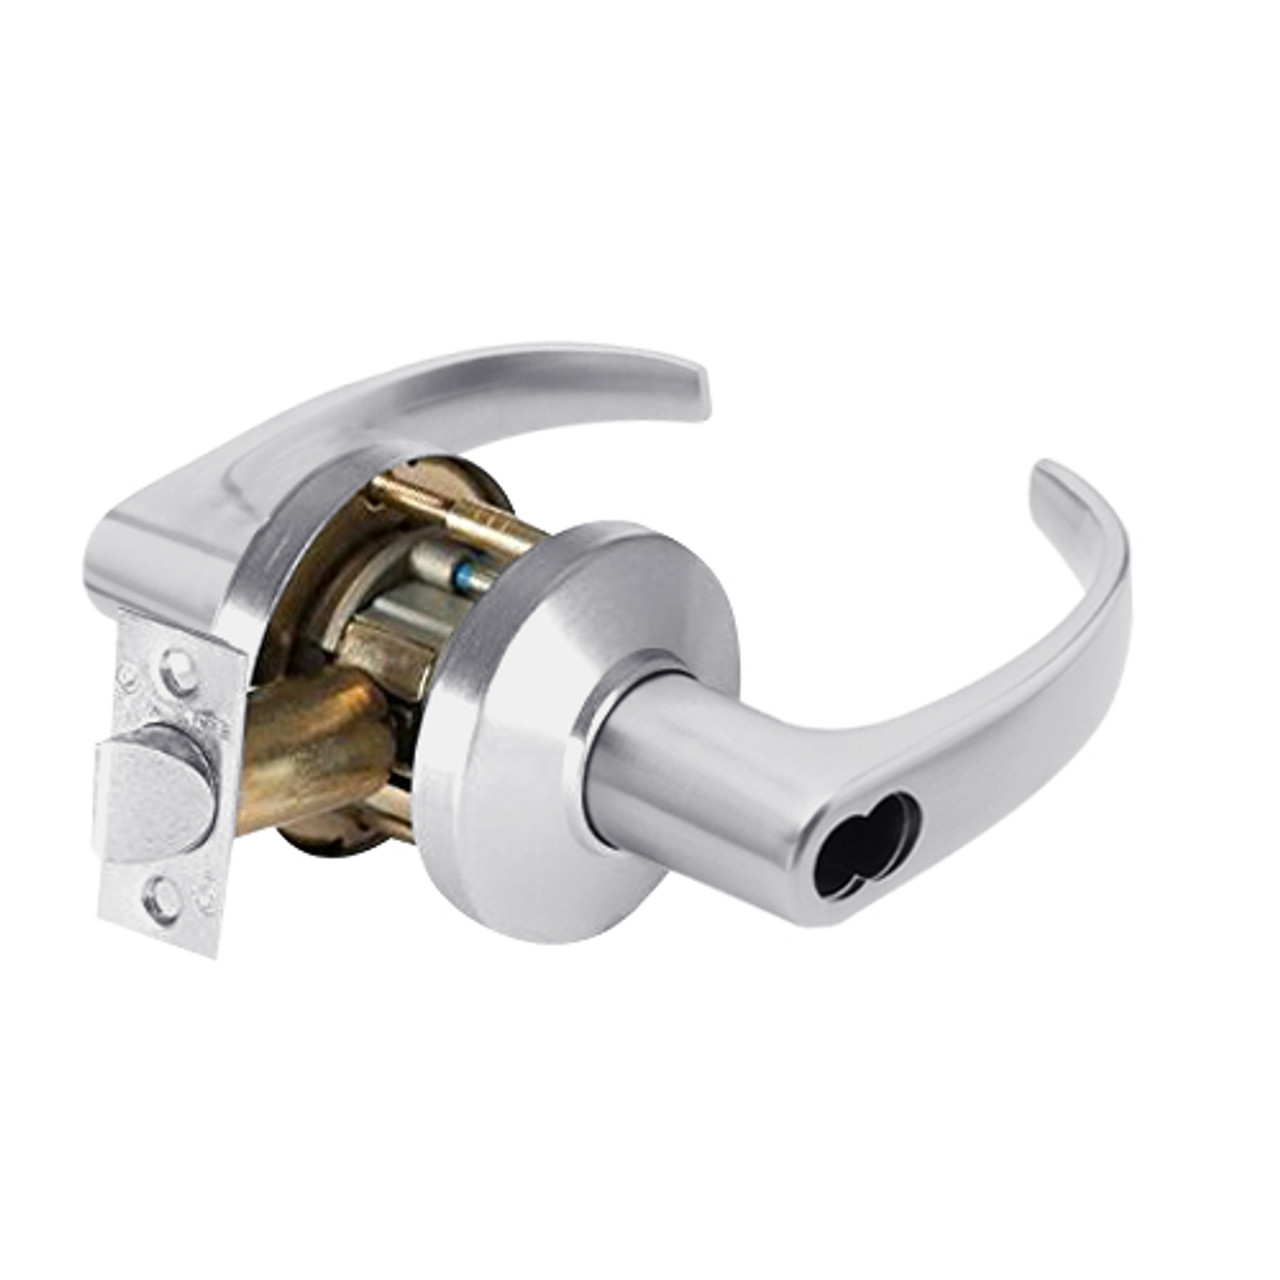 9K47IN14CSTK626 Best 9K Series Intruder Cylindrical Lever Locks with Curved with Return Lever Design Accept 7 Pin Best Core in Satin Chrome